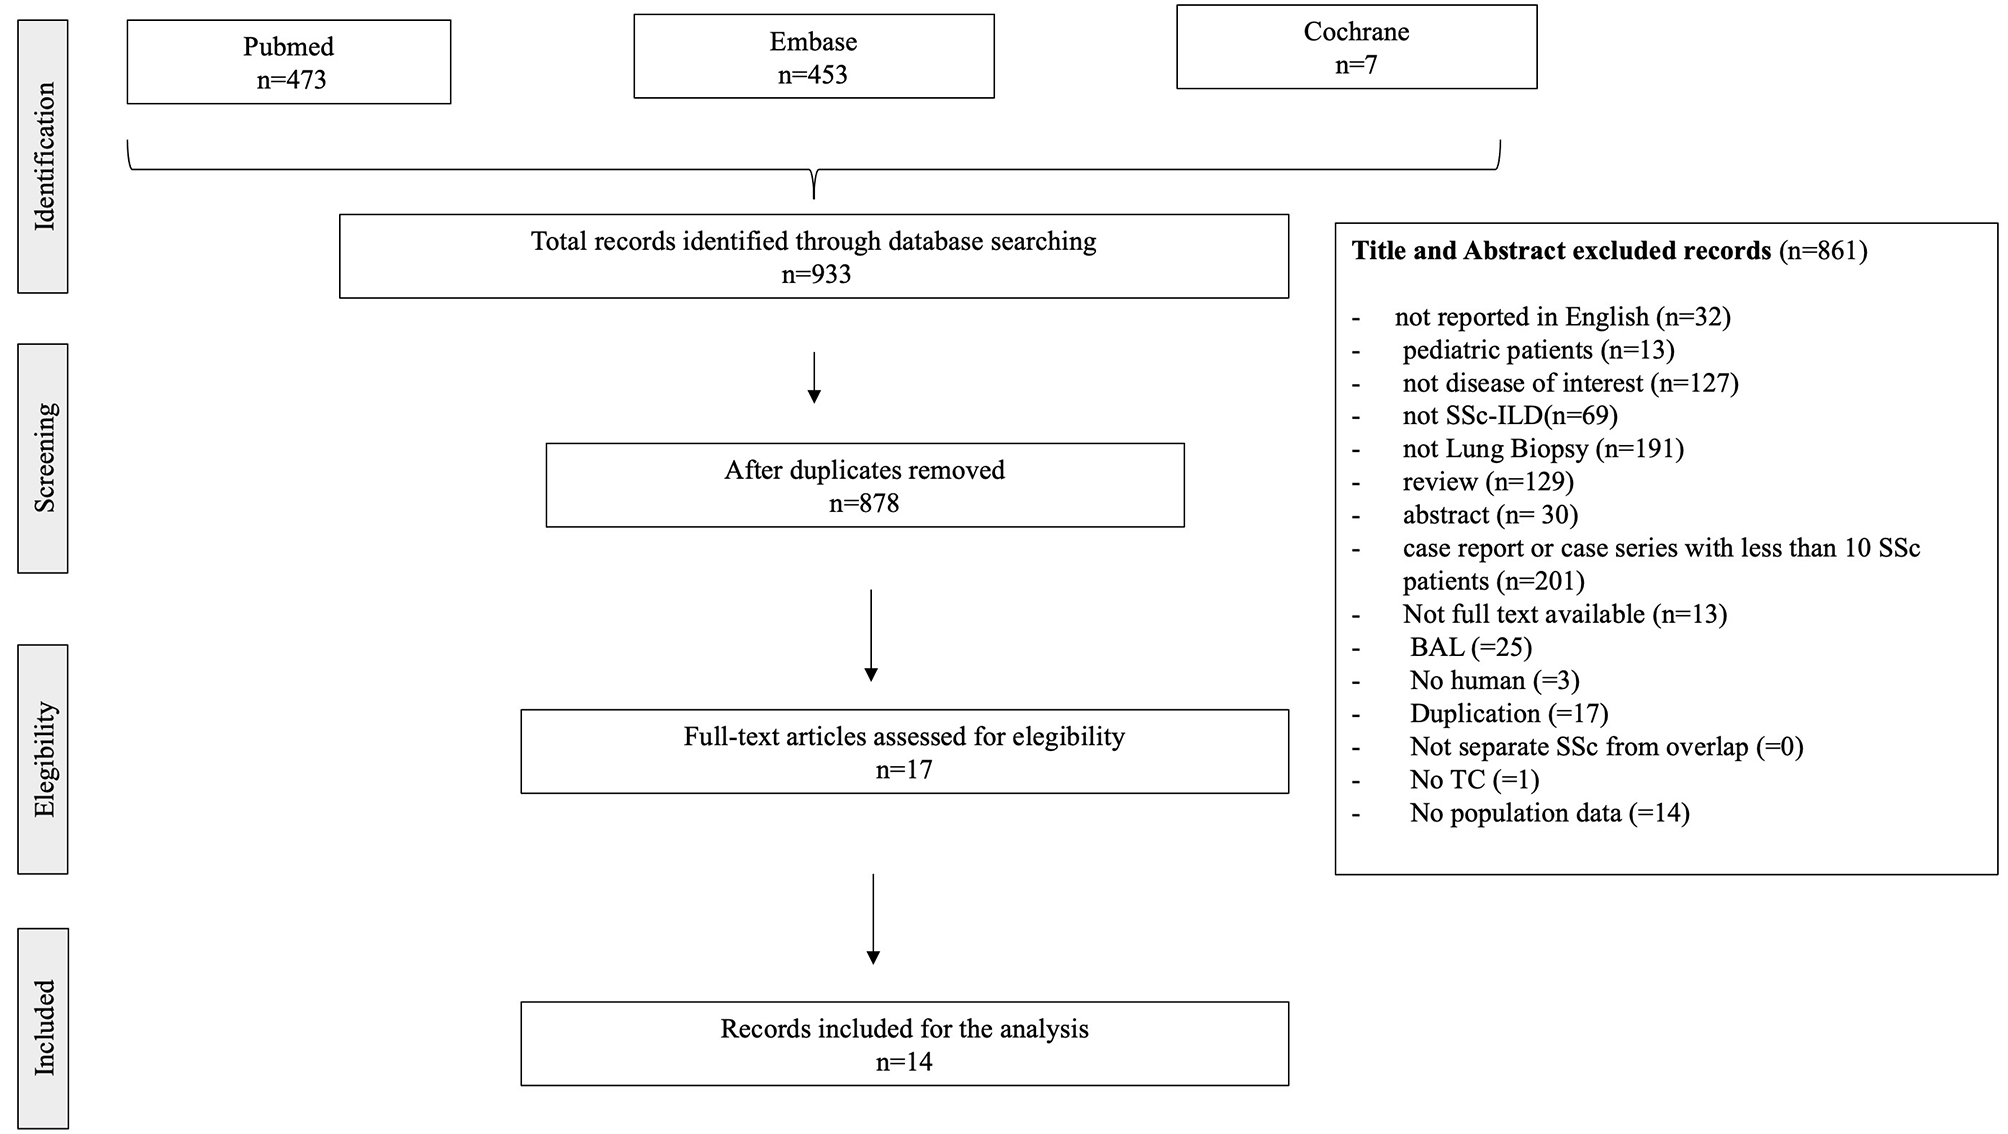 The role of lung biopsy for diagnosis and prognosis of interstitial lung disease in systemic sclerosis: a systematic literature review